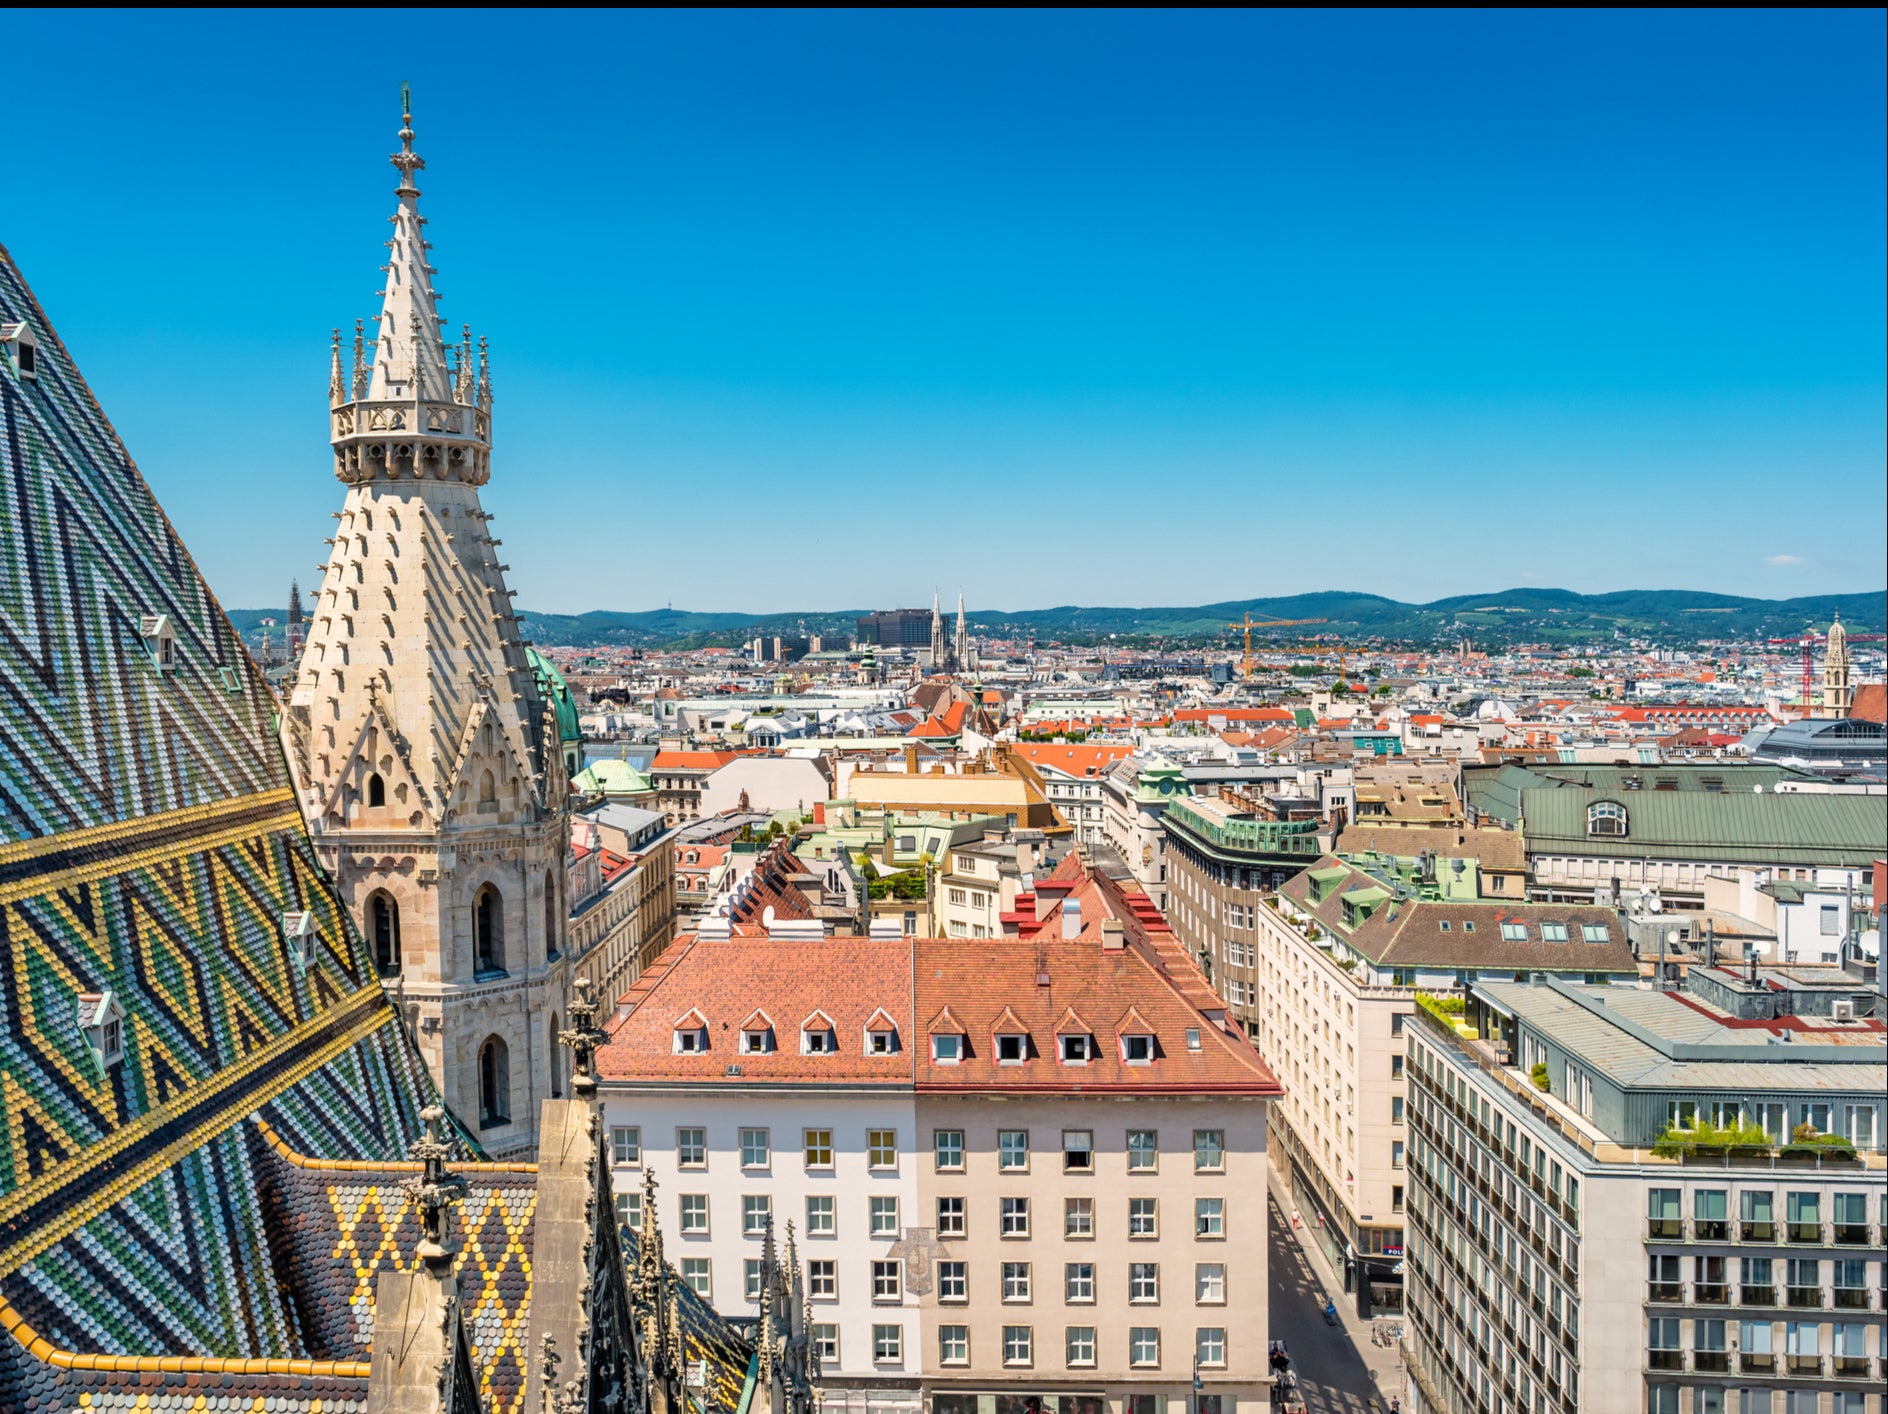 Vienna tops the list for the second year in a row